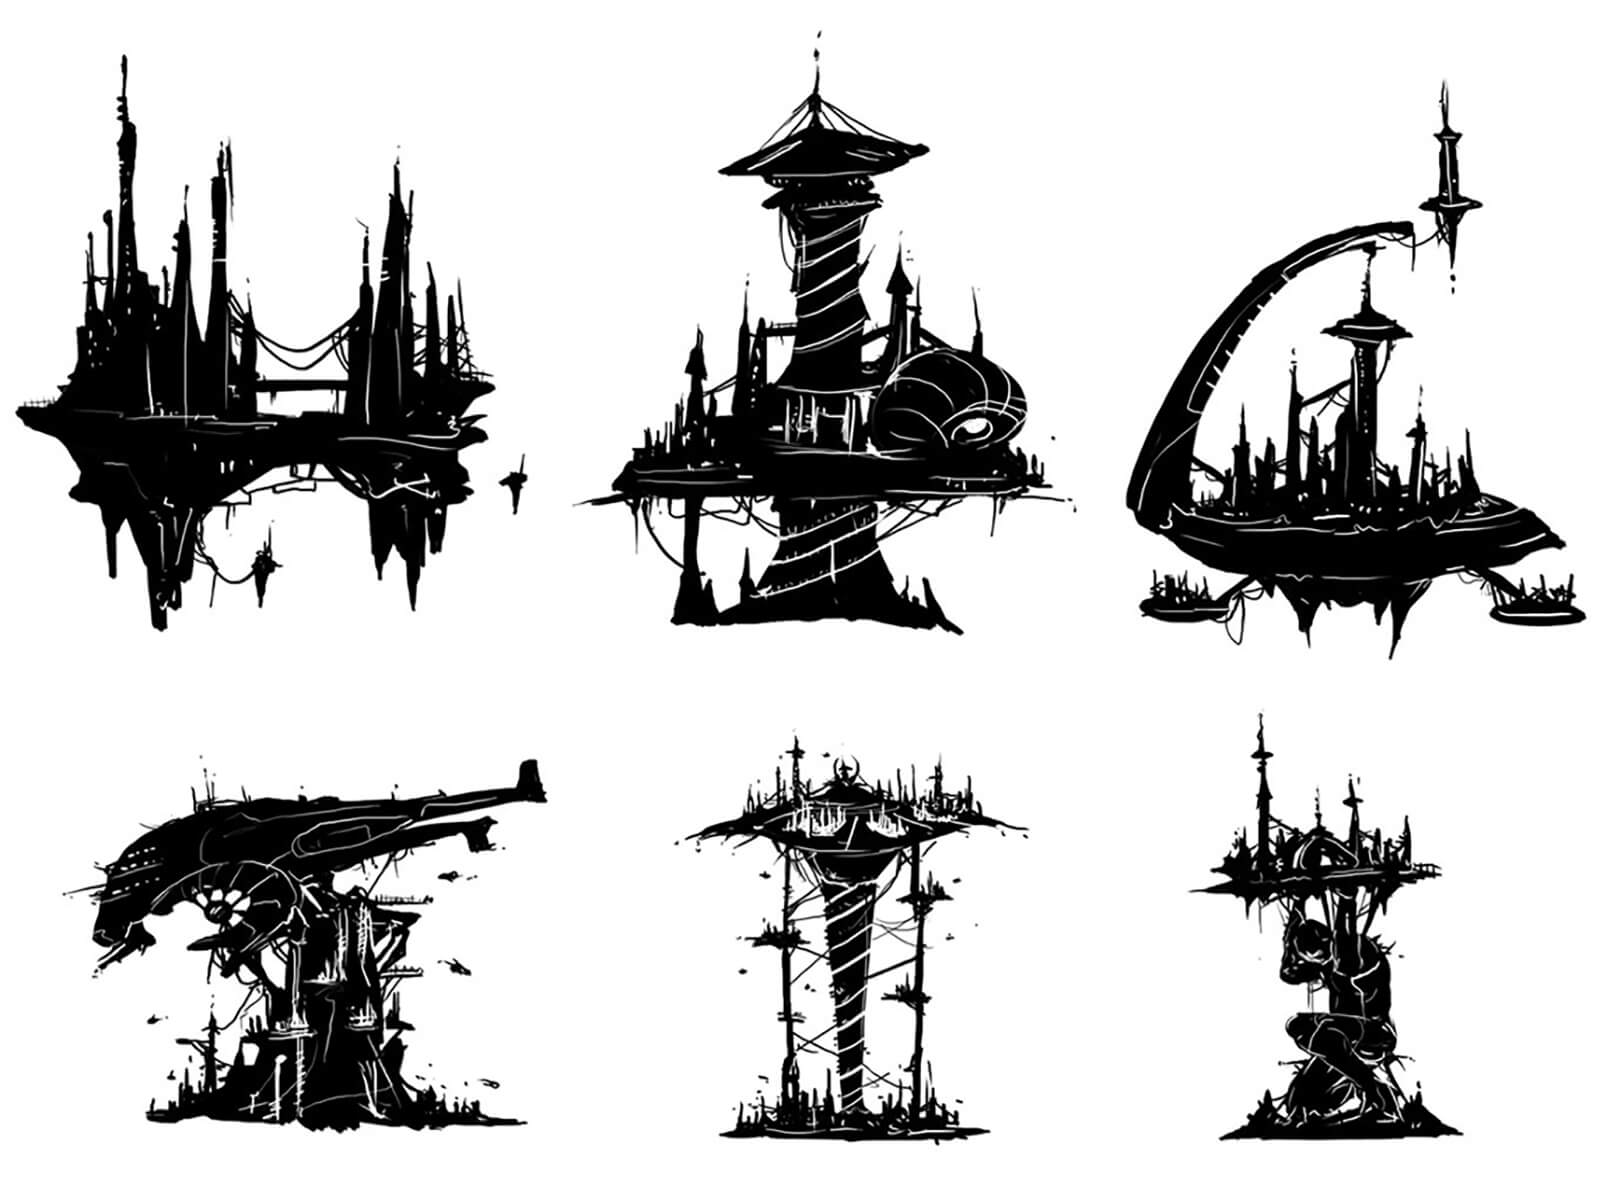 Concept sketches of an alien, city-like aircraft, with varying amounts of spire and tower structures on top of it.